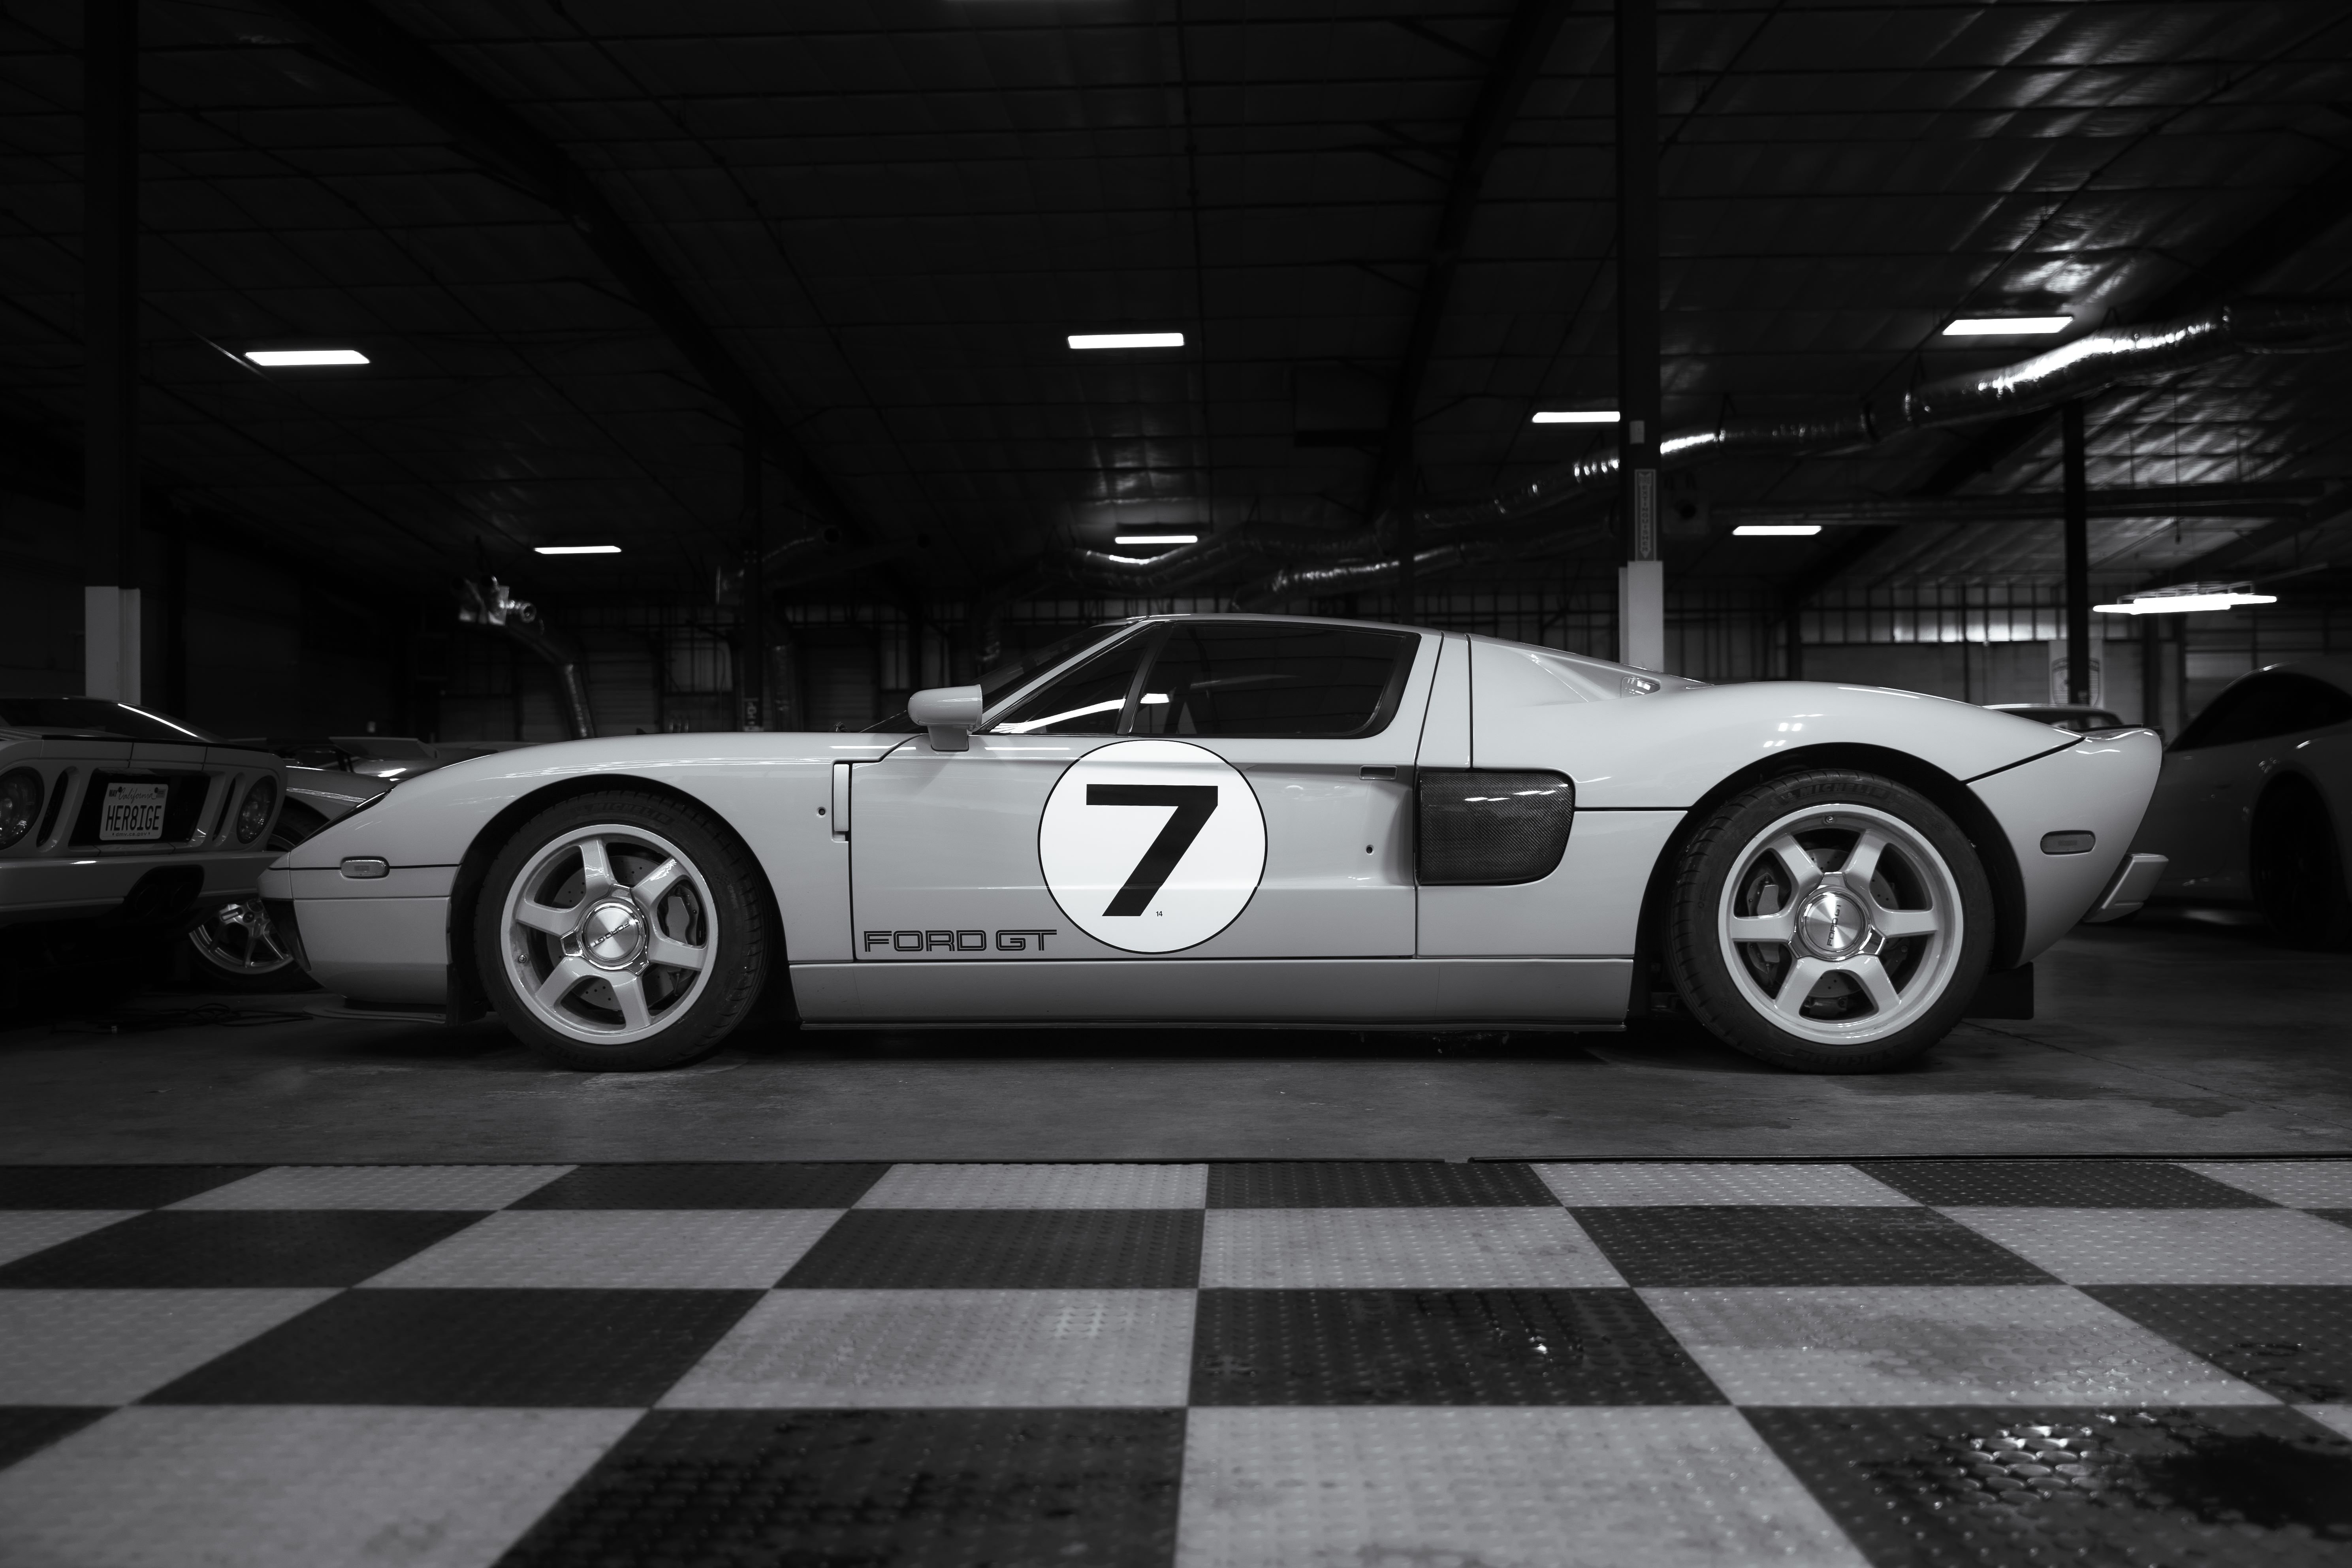 Heritage Ford GT at Petrol Lounge.